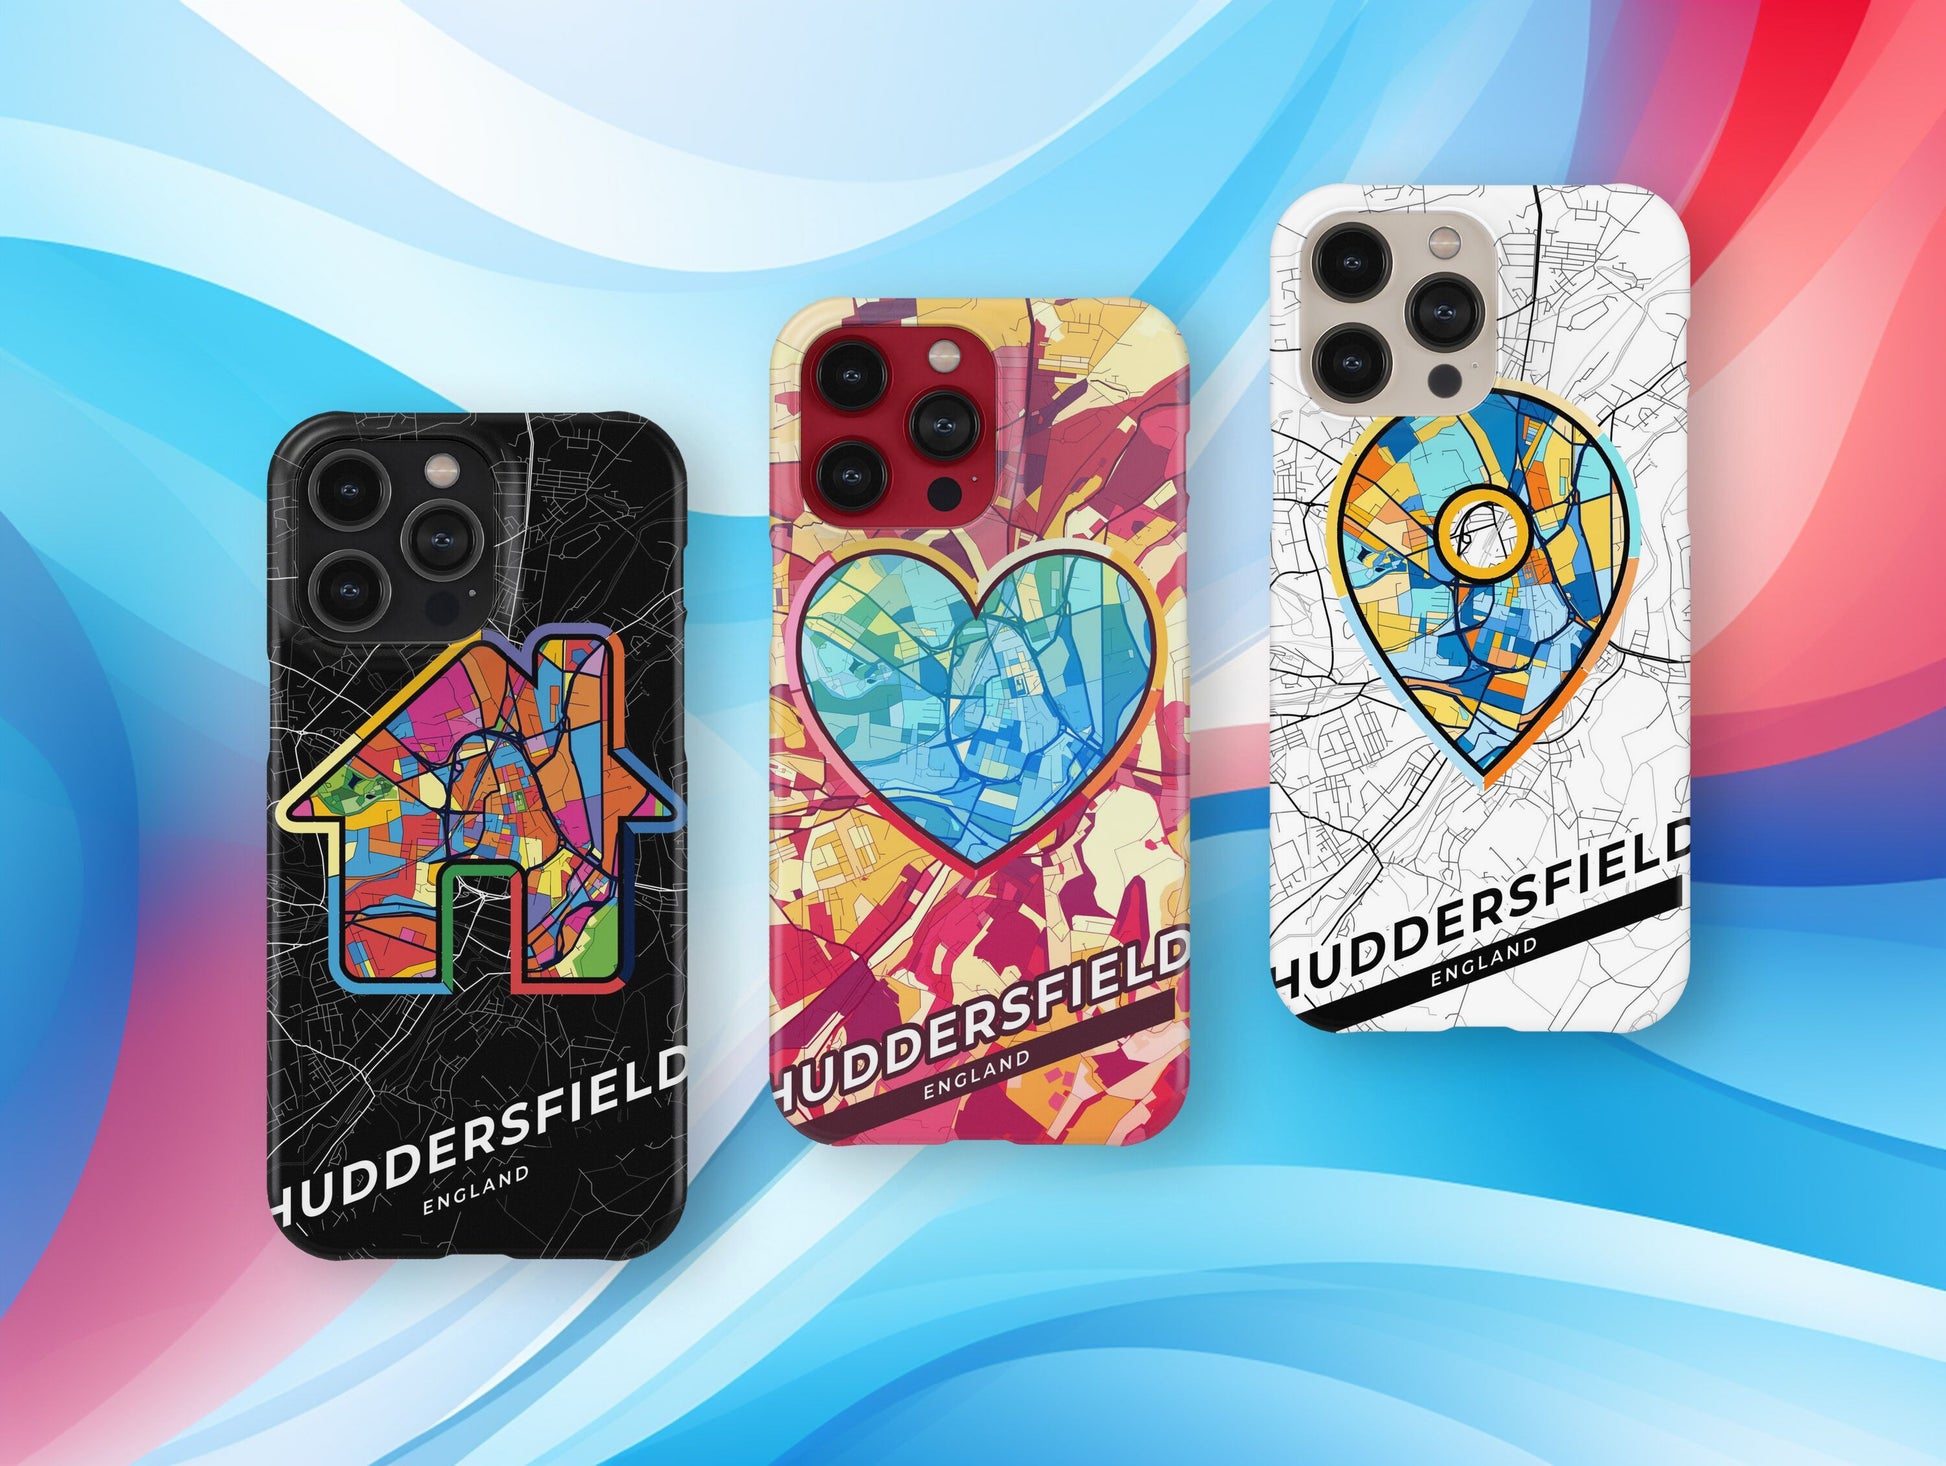 Huddersfield England slim phone case with colorful icon. Birthday, wedding or housewarming gift. Couple match cases.